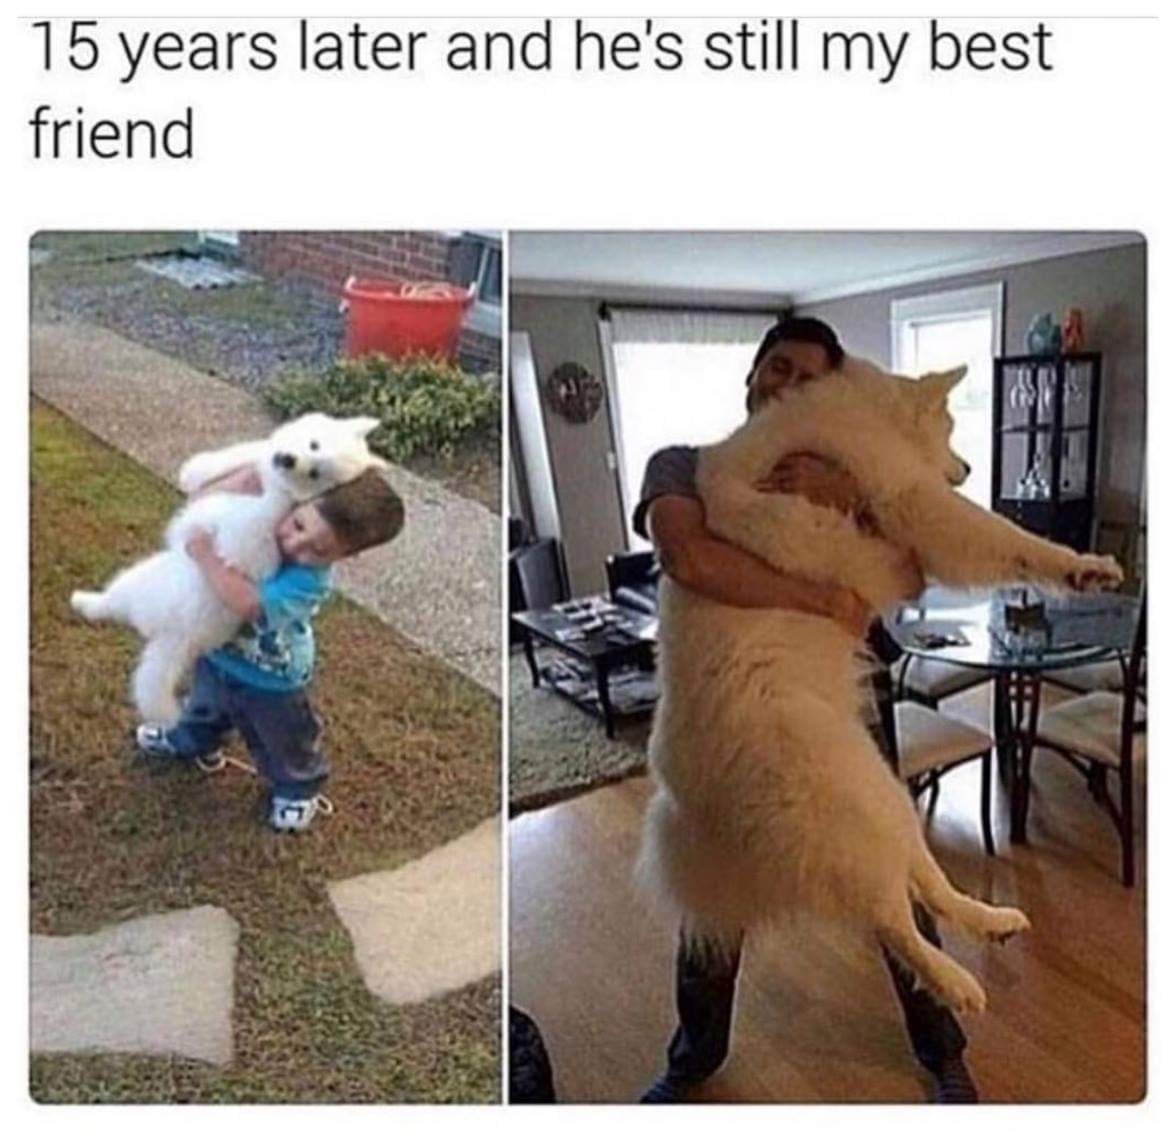 Meme - 15 years later and he's still my best friend